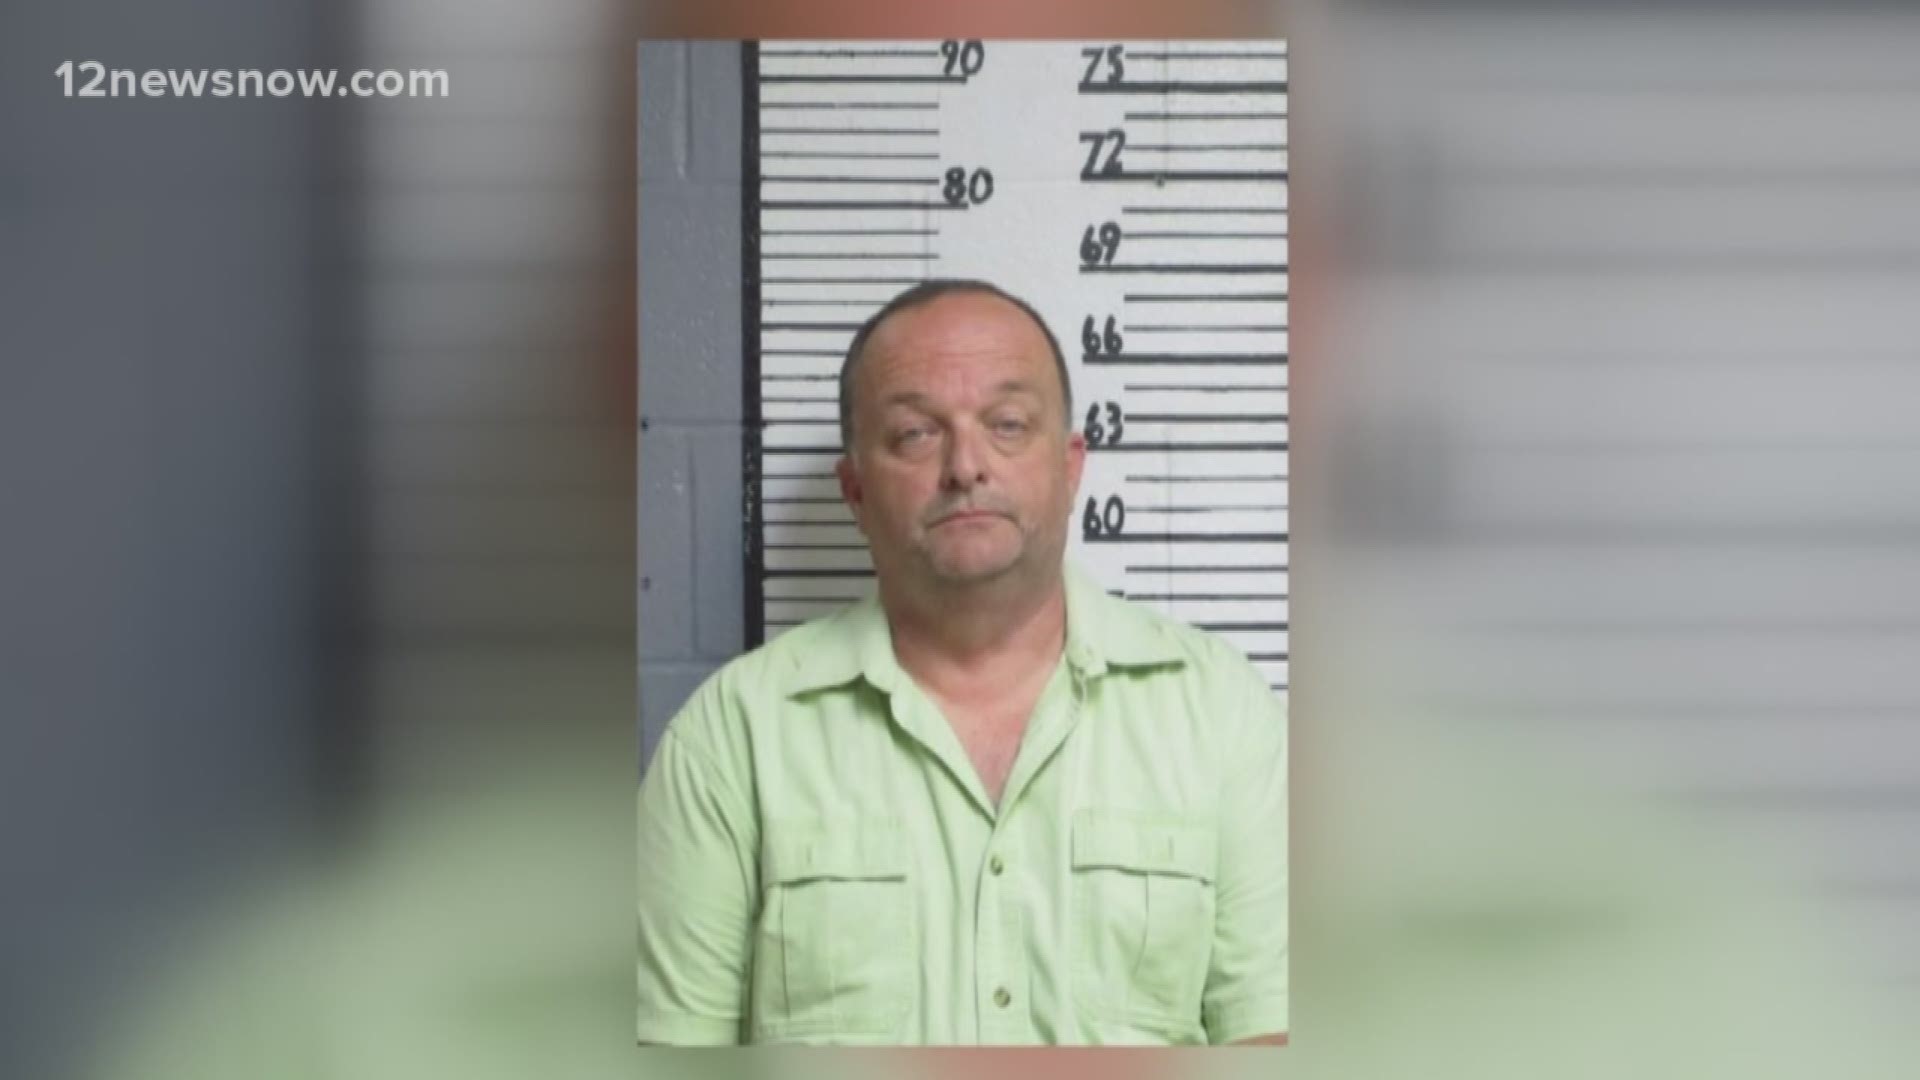 Four days after the Texas Rangers finished their investigation of Ivanhoe City Marshal, Terry Riley, he was arrested. Ivanhoe Mayor, Cathy Bennett, says that nothing was done wrong and that Riley will not be placed on administrative leave at this time.